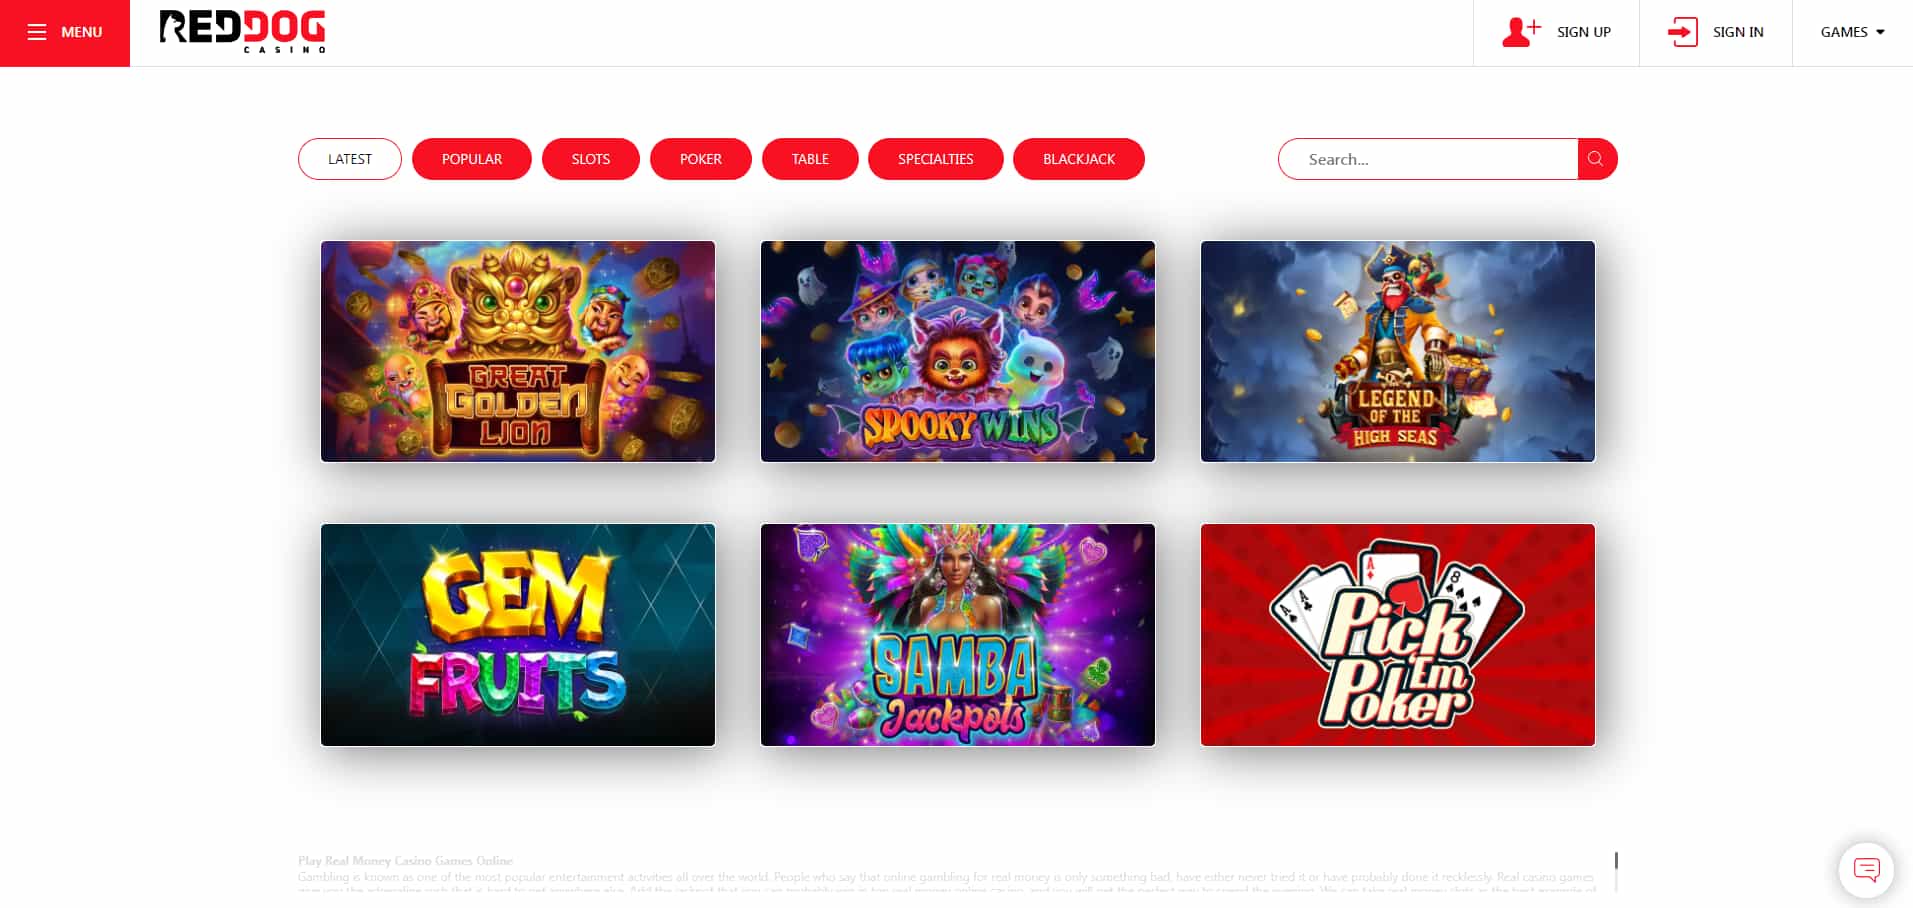 red dog casino bank account transfers